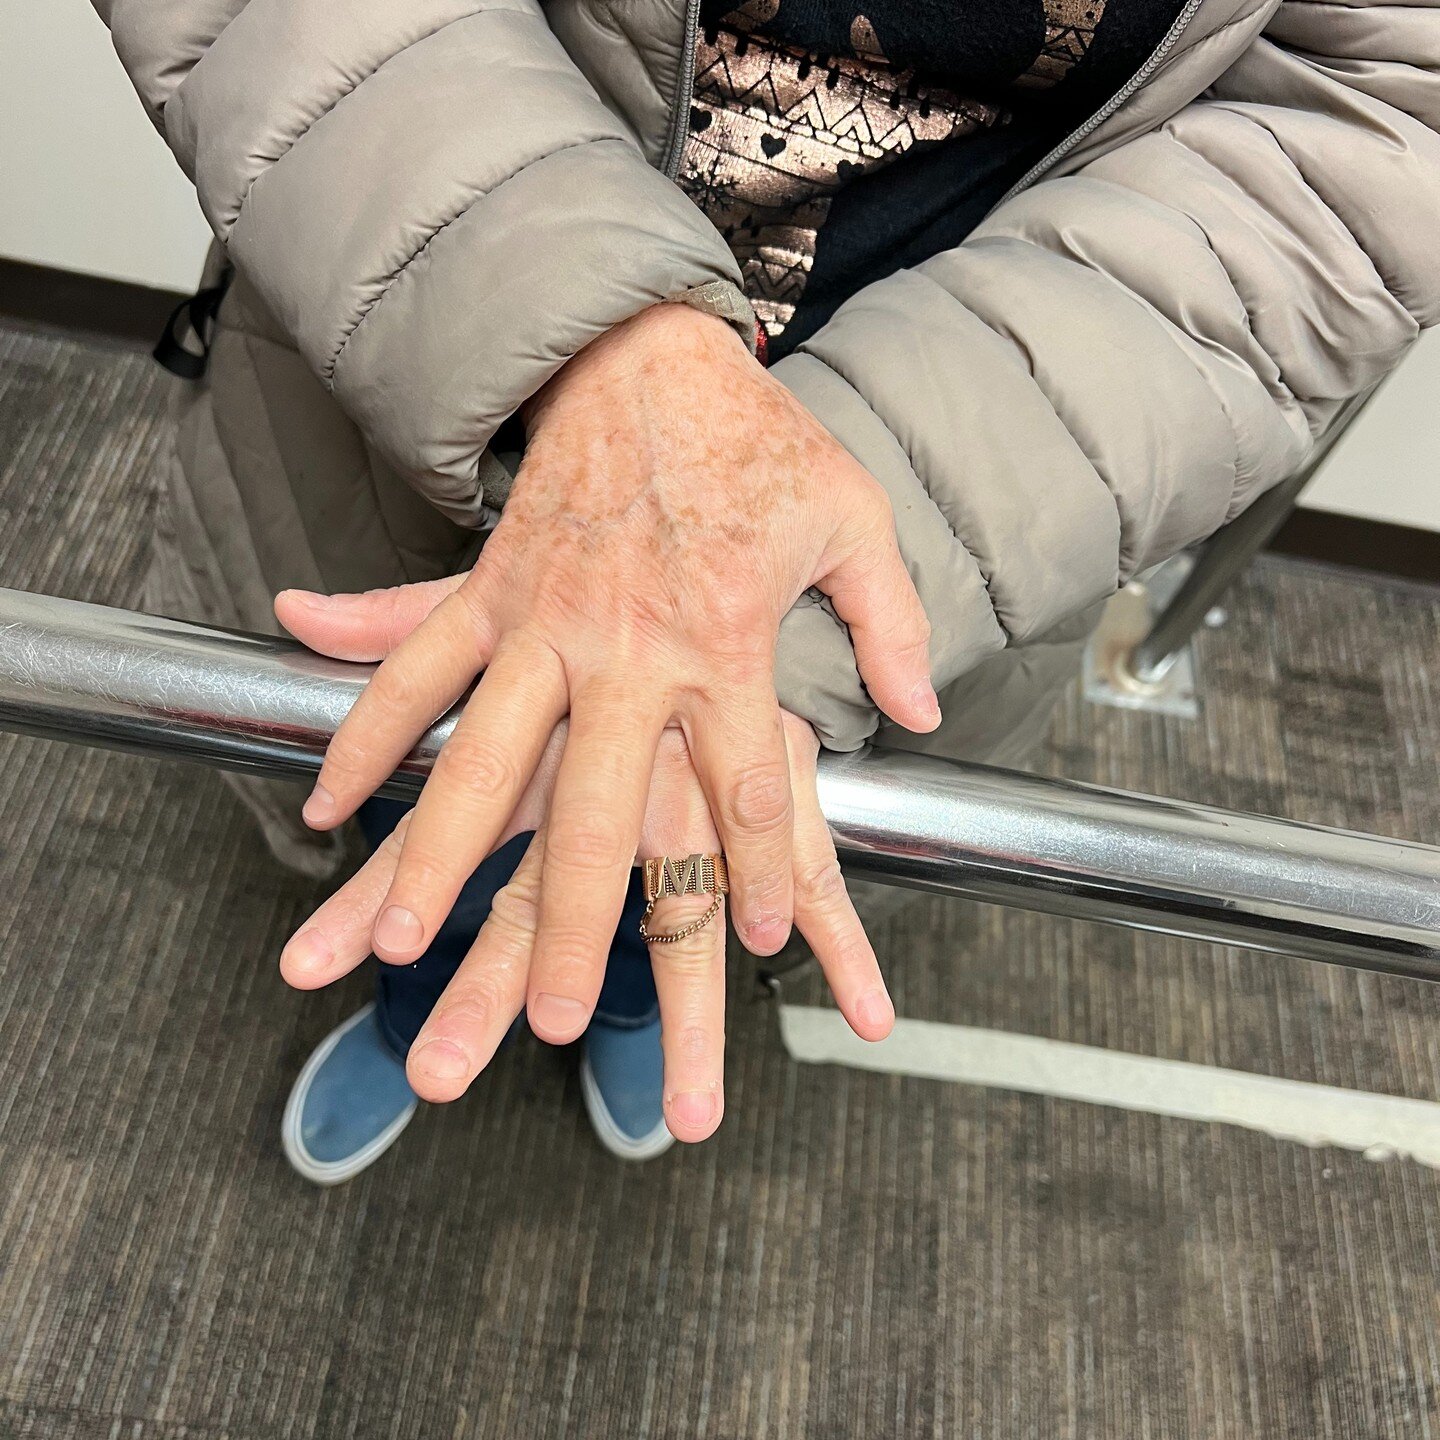 Can anyone identify which finger(s) are actually silicone restoration(s)? 

These prosthetic devices are crafted from a transparent silicone glove that closely replicates the unaffected side, featuring intricate details such as wrinkles, veins, knuck